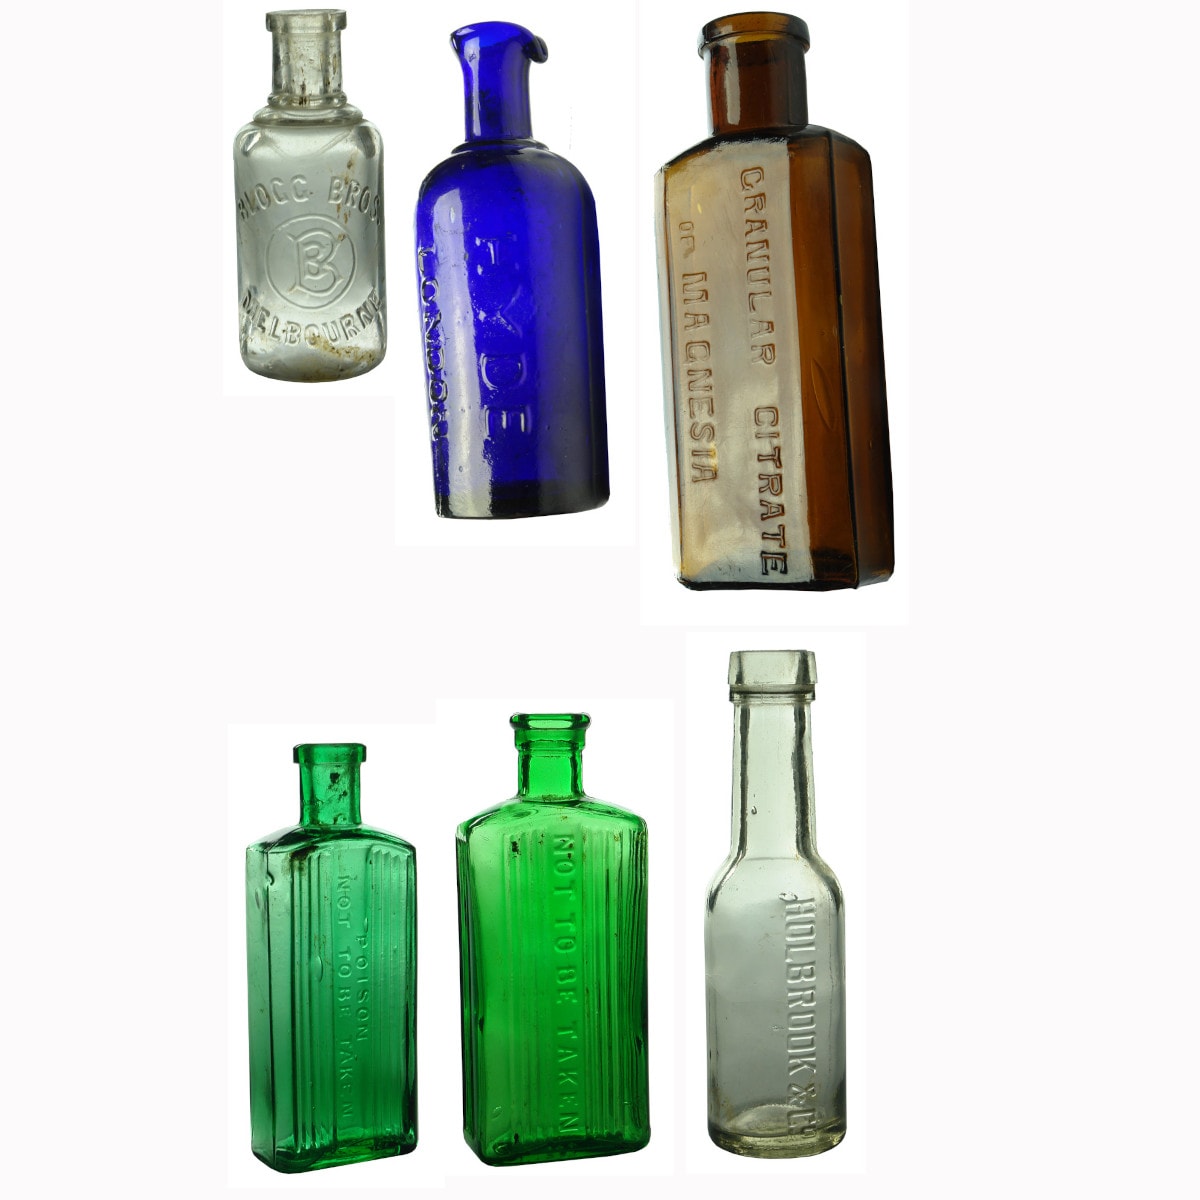 Six small bottles: Blogg Bros., Hyde, Magnesia, Poisons & Holbrook jar.